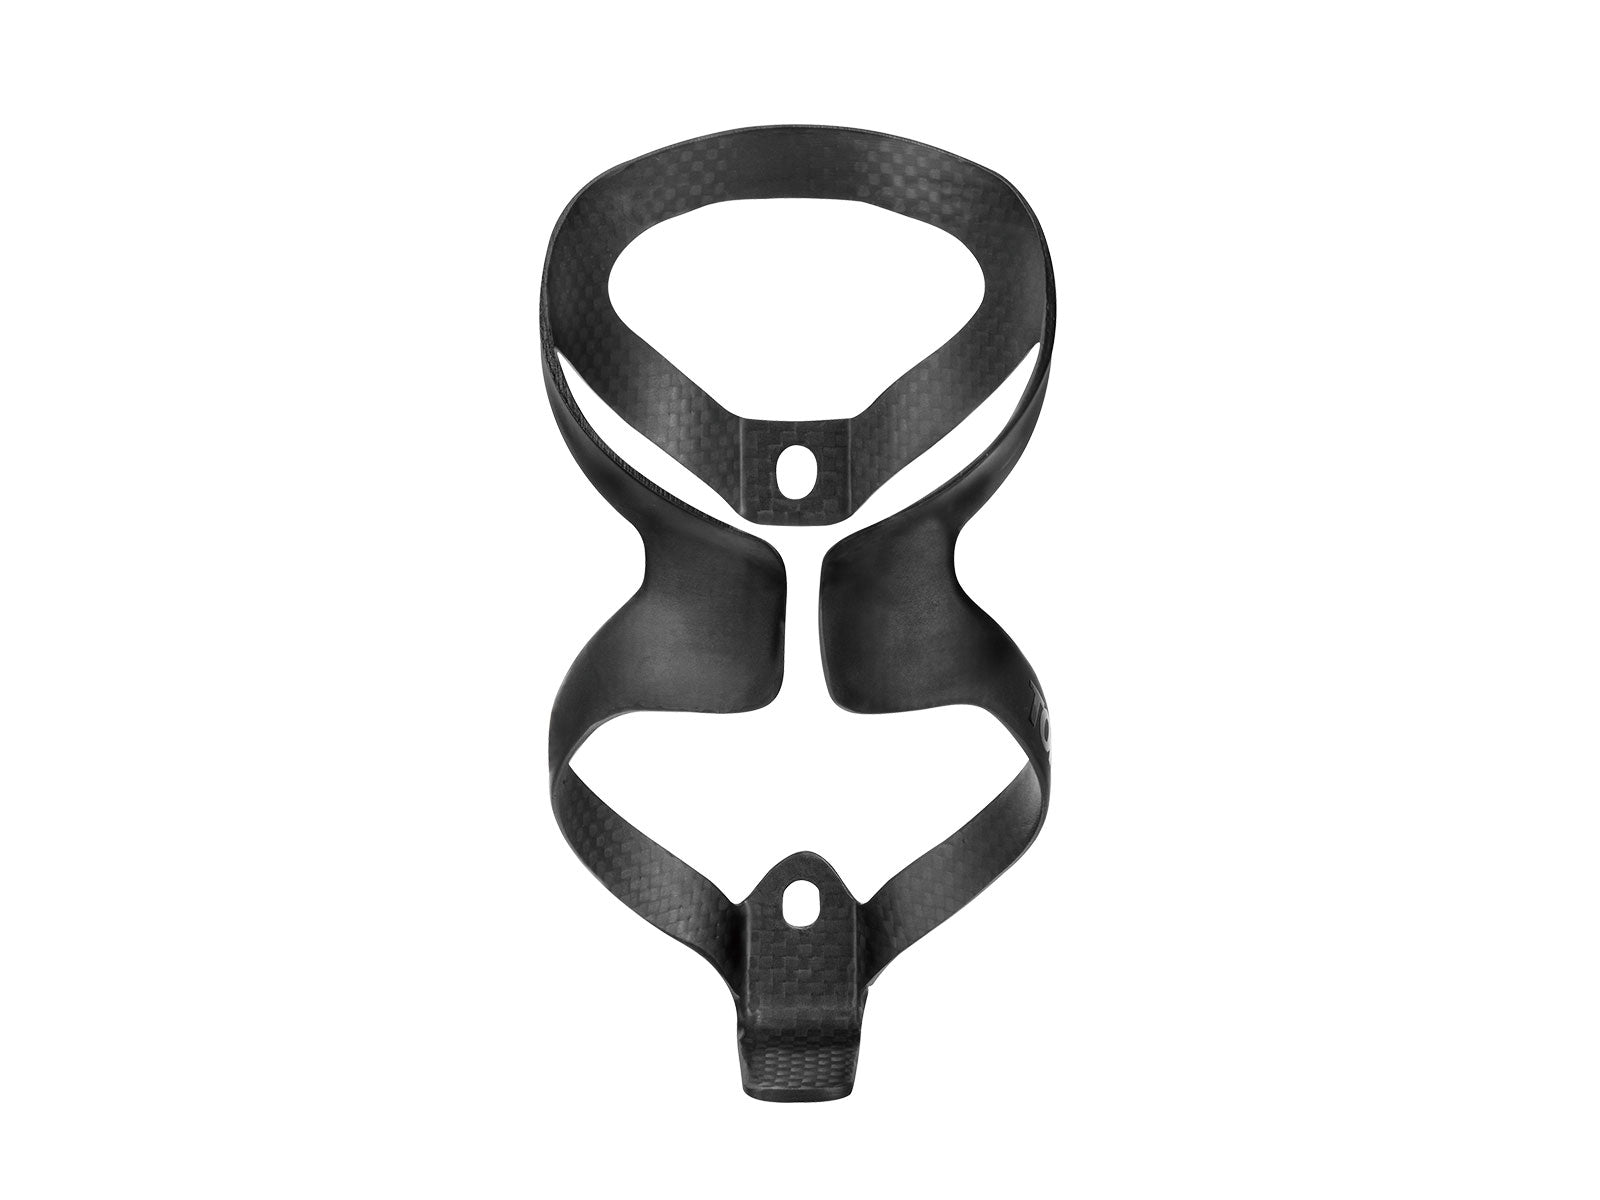 SHUTTLE CAGE XE BOTTLE CAGE